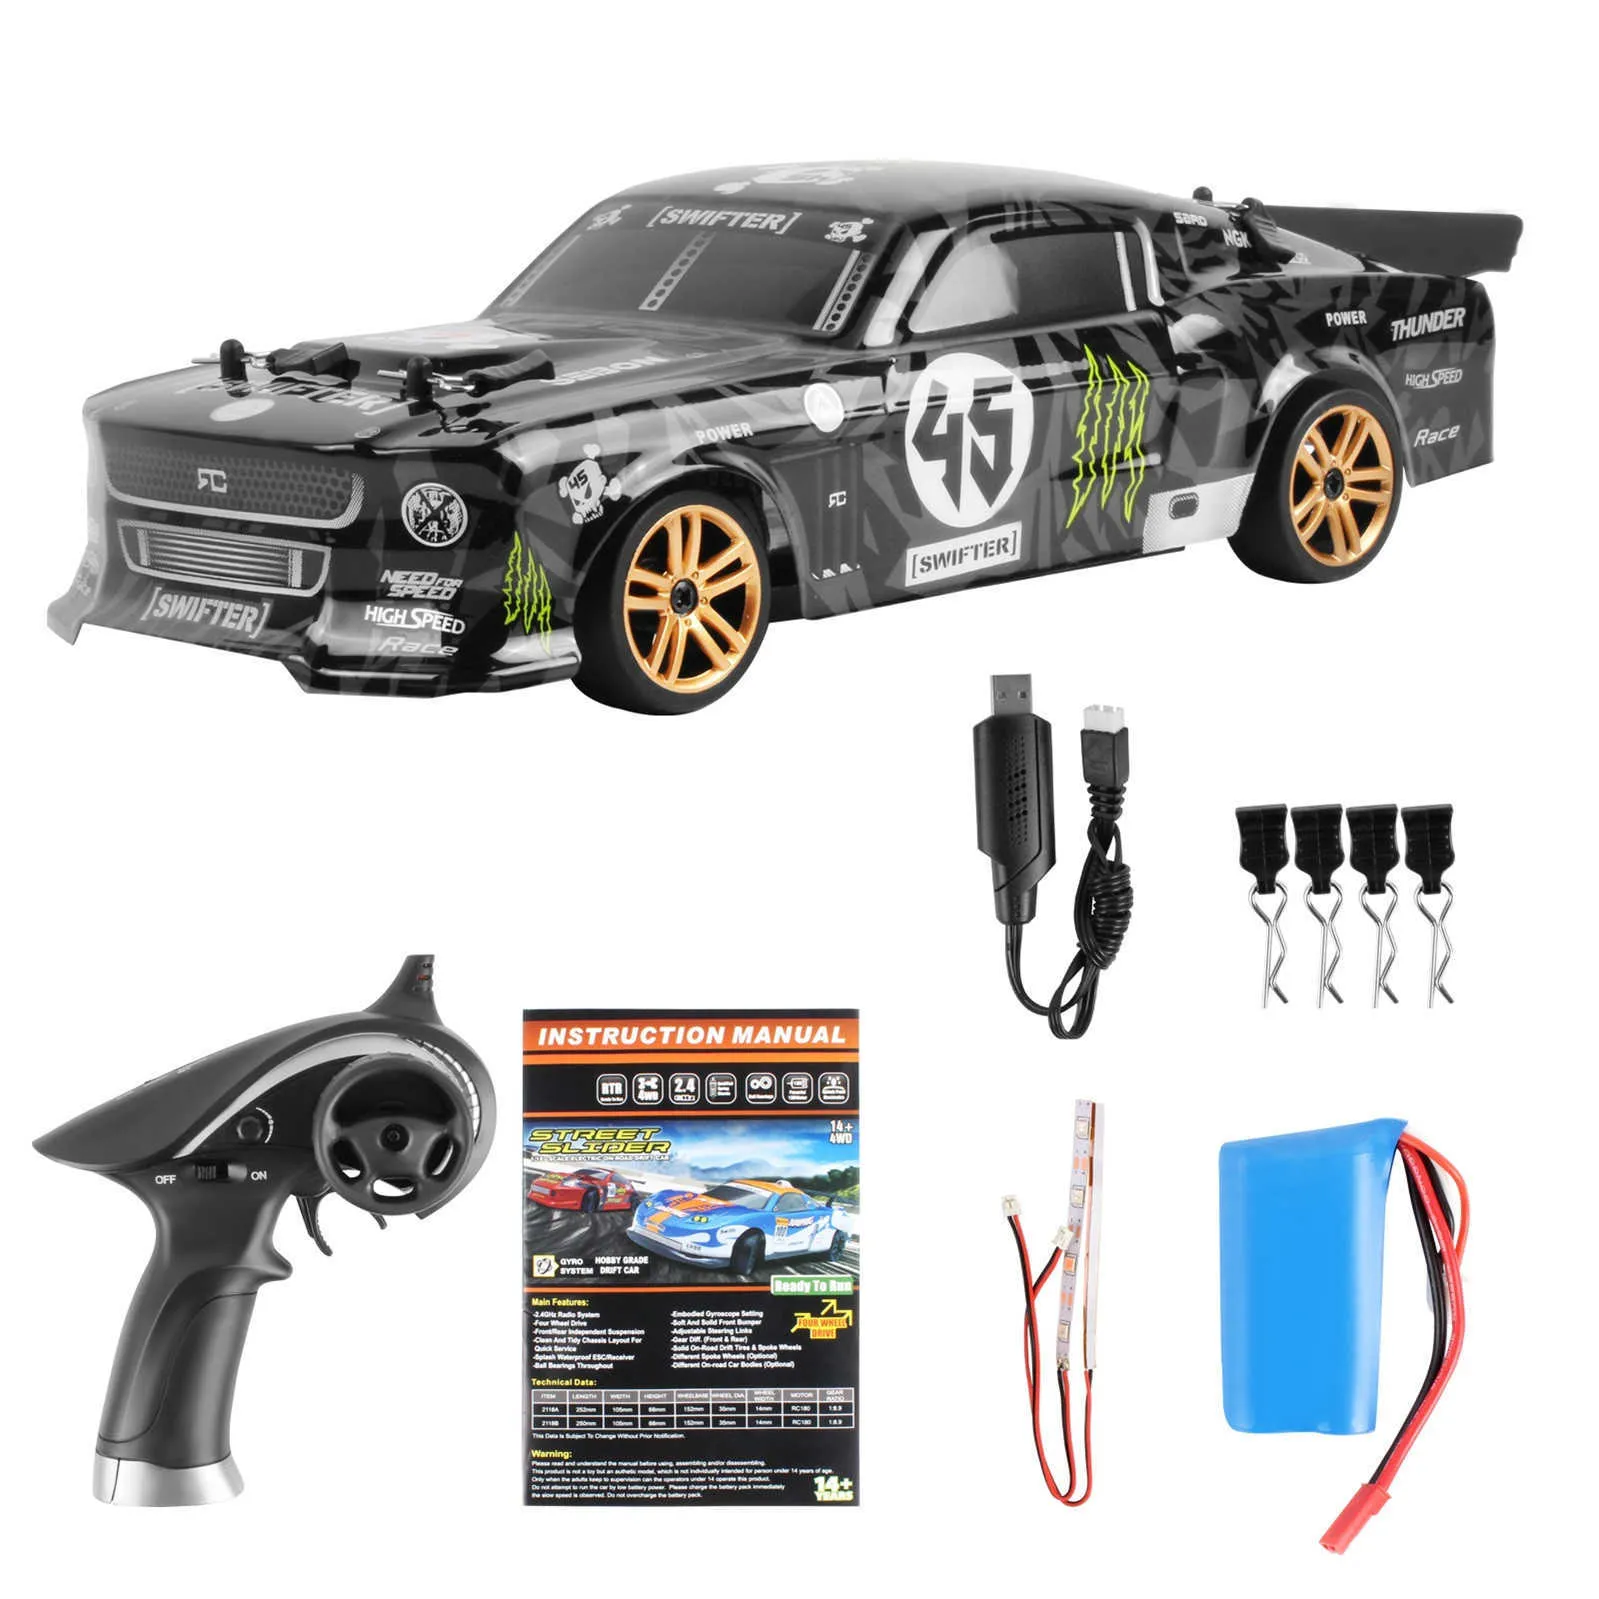 Remote Control Highspeed Car 24g Remote Control 118 Model Fourwheel Drive Drifting Car Selected Highquality 60kmh Rc Q07621981